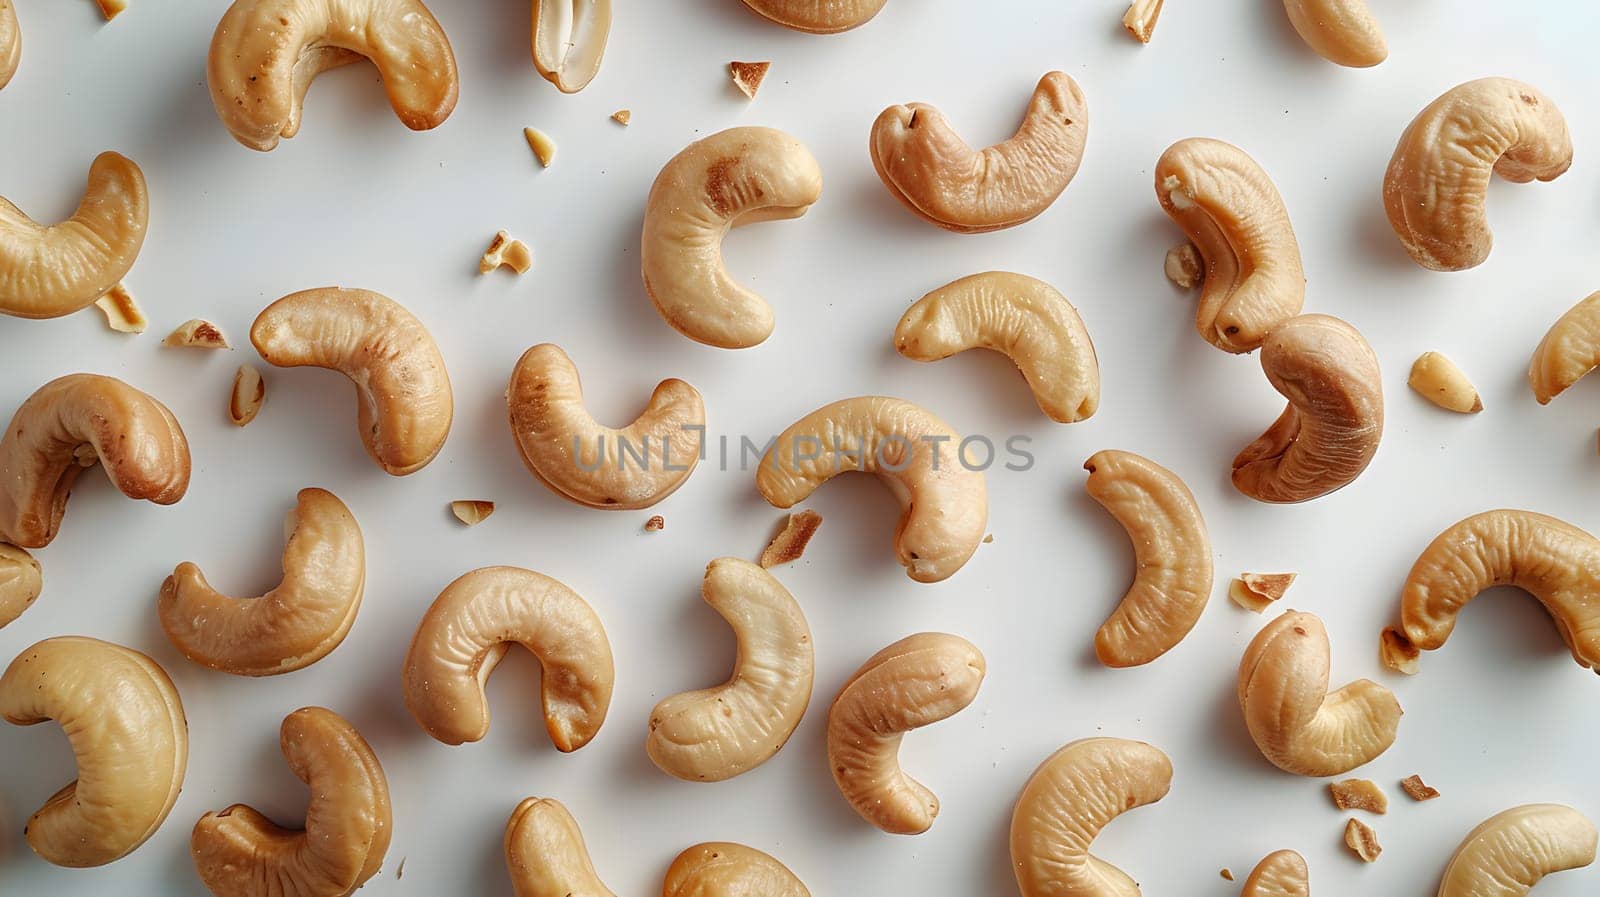 Cashews, a popular ingredient in many cuisines, sit on a white surface by Nadtochiy